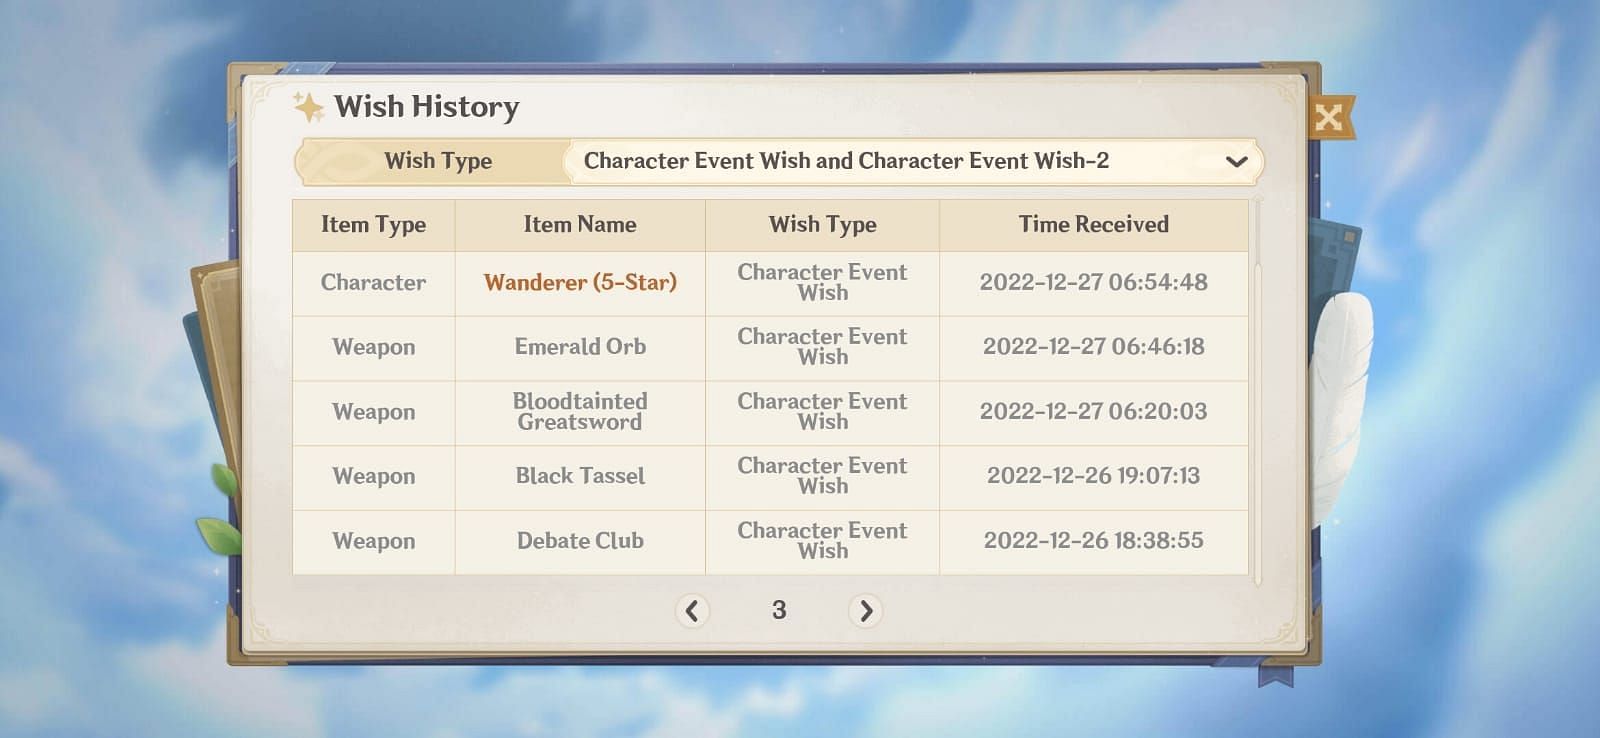 Players can check the number of pulls in the History section of the Wish menu (Image via Genshin Impact))